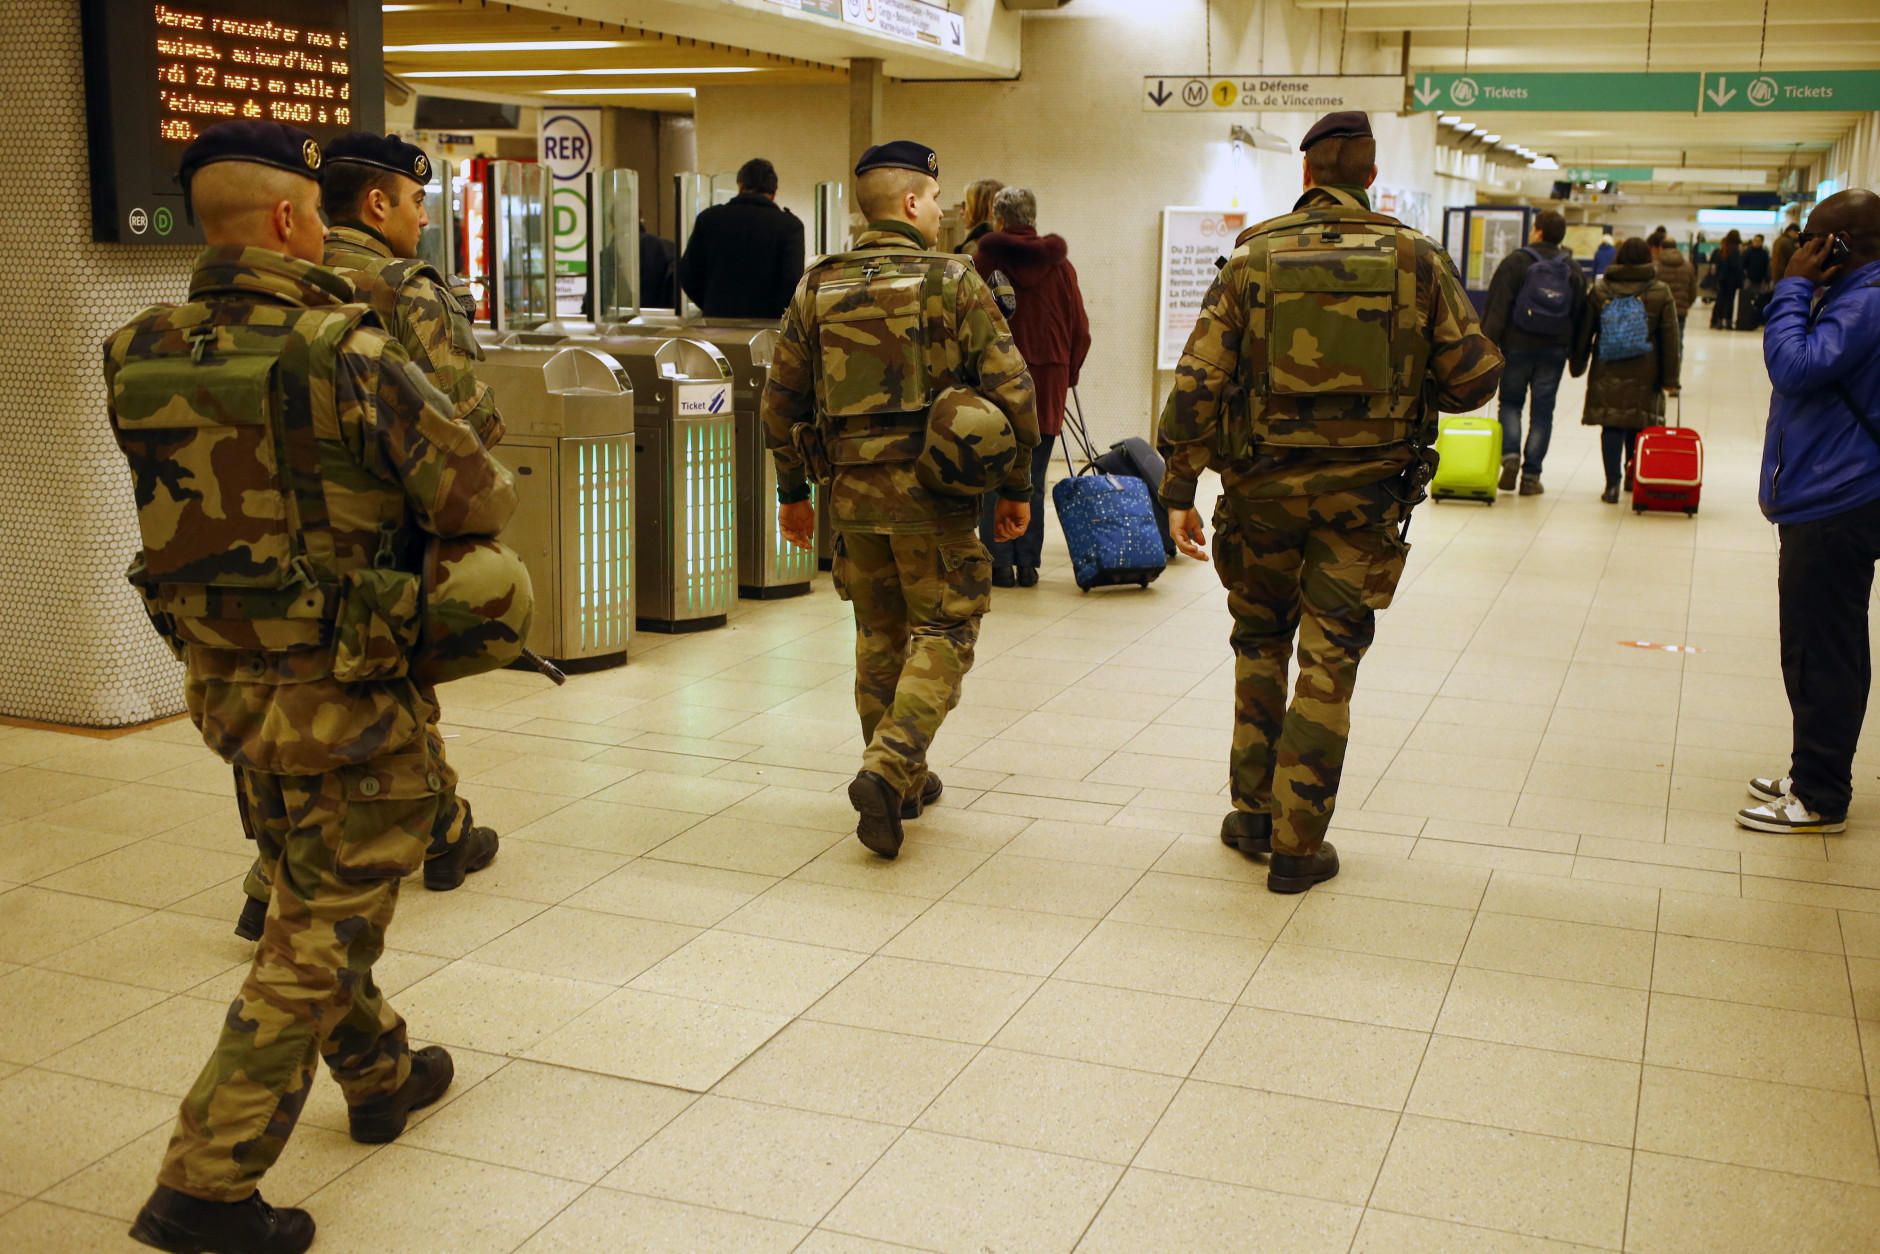 French soldiers patrol in the subway entrance station in Paris, France, Tuesday, March 22, 2016. Authorities are tightening security at airports and on the streets of European cities after attacks on the Brussels airport and subways system that killed at least one person and injured many others. (AP Photo/Francois Mori)